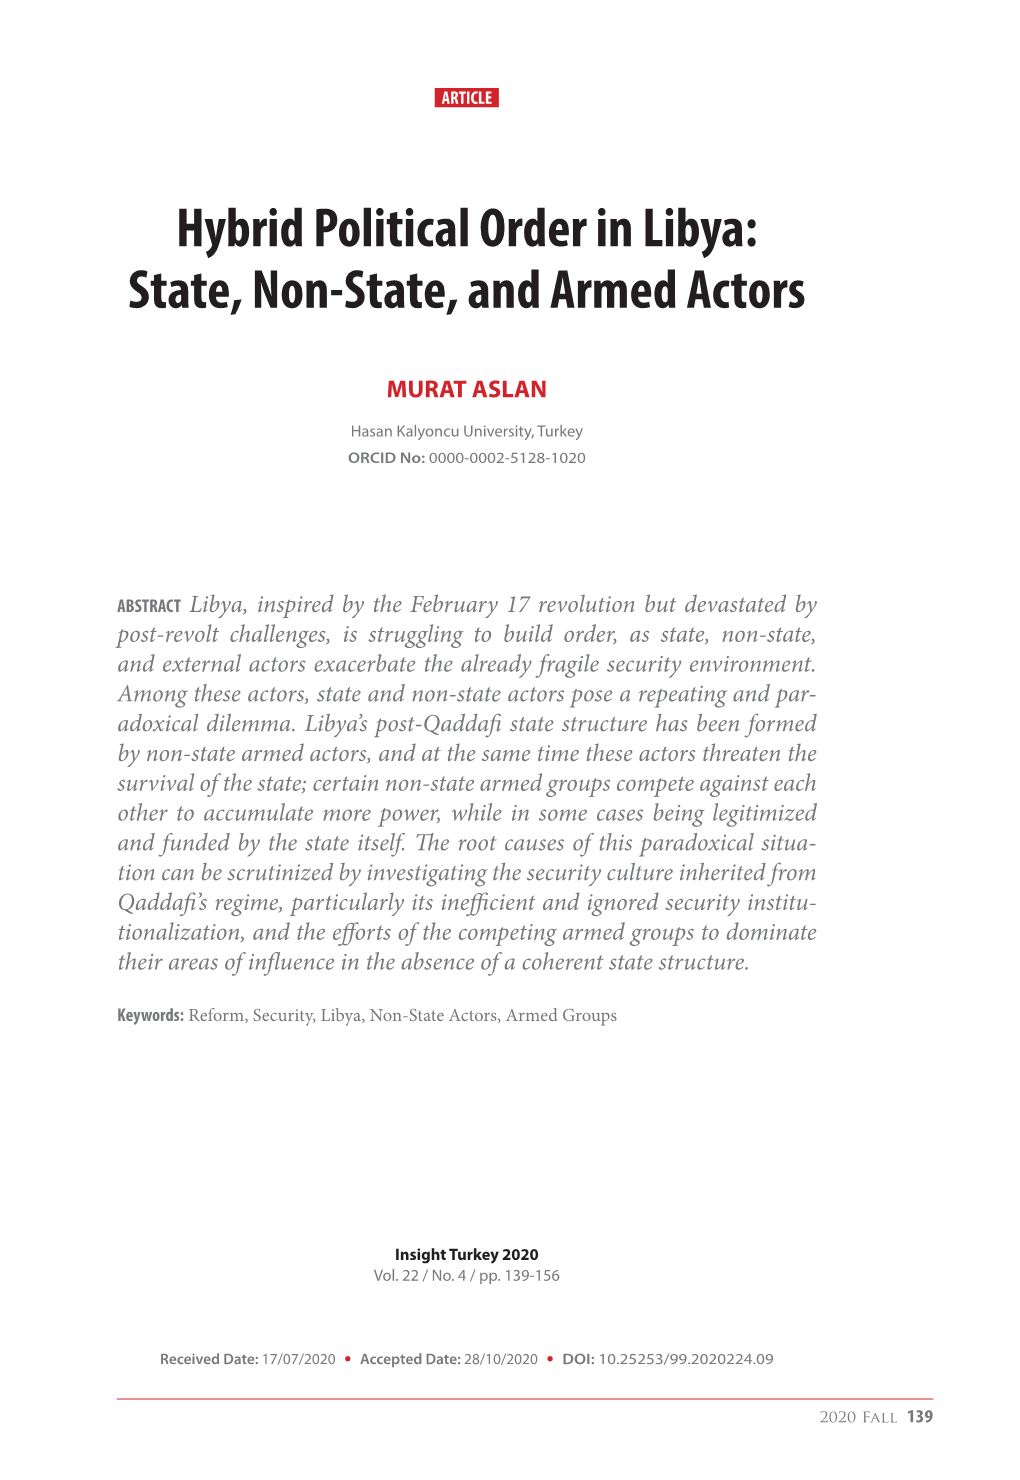 Hybrid Political Order in Libya: State, Non-State, and Armed Actors